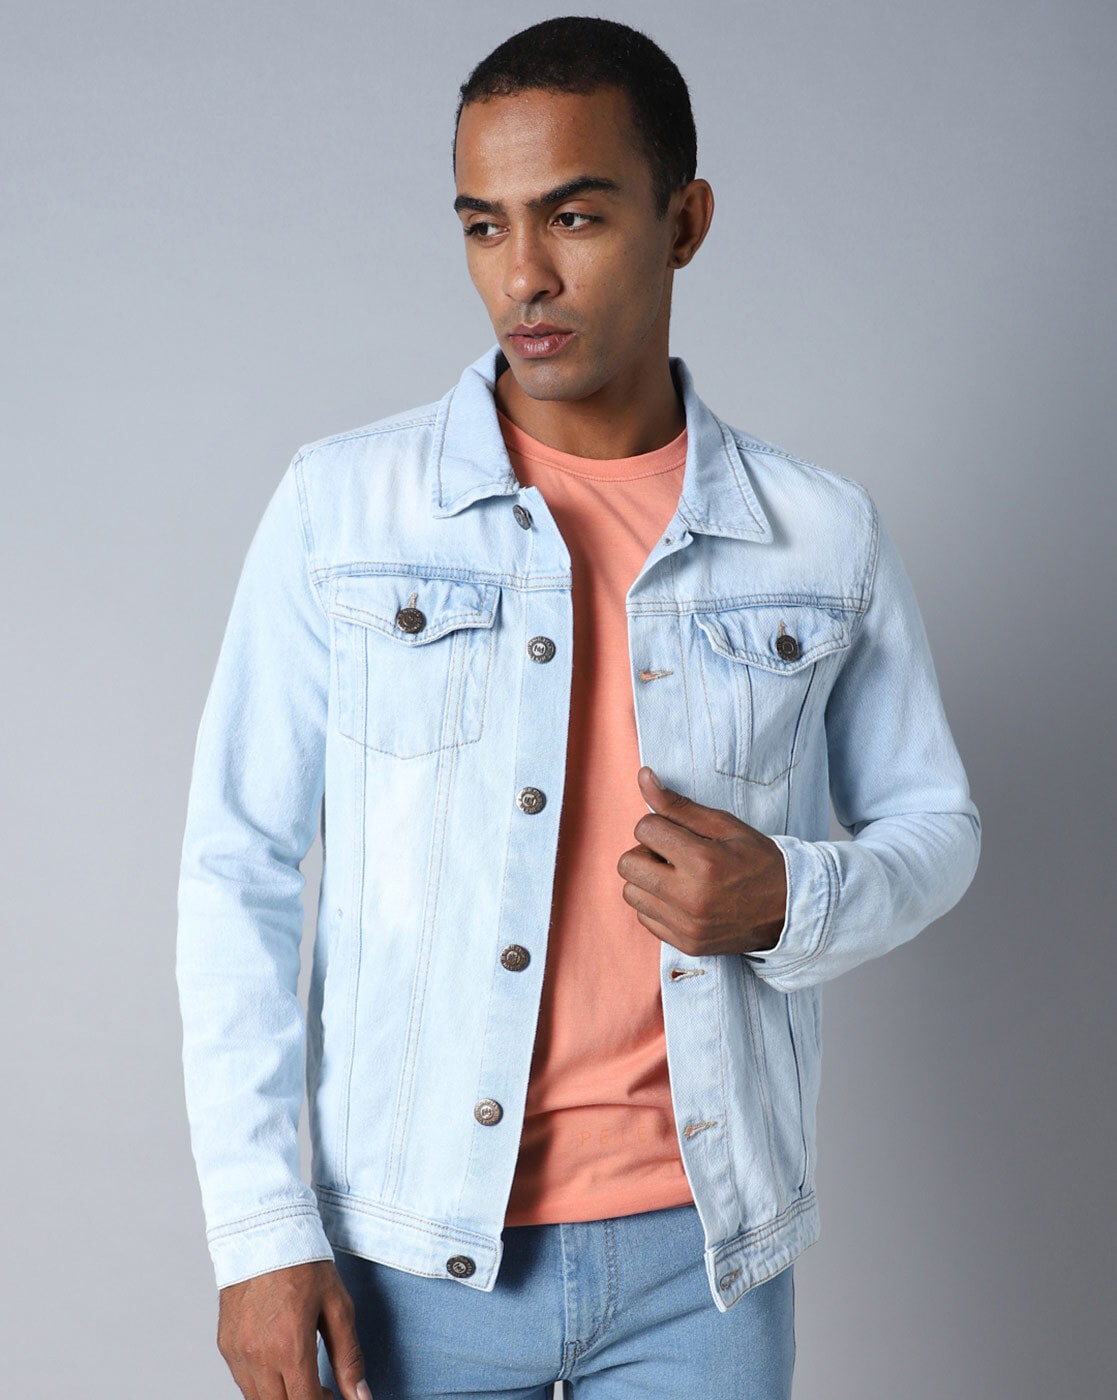 Discover the 6 Men's Style With Denim Jacket - Harper's BAZAAR Malaysia